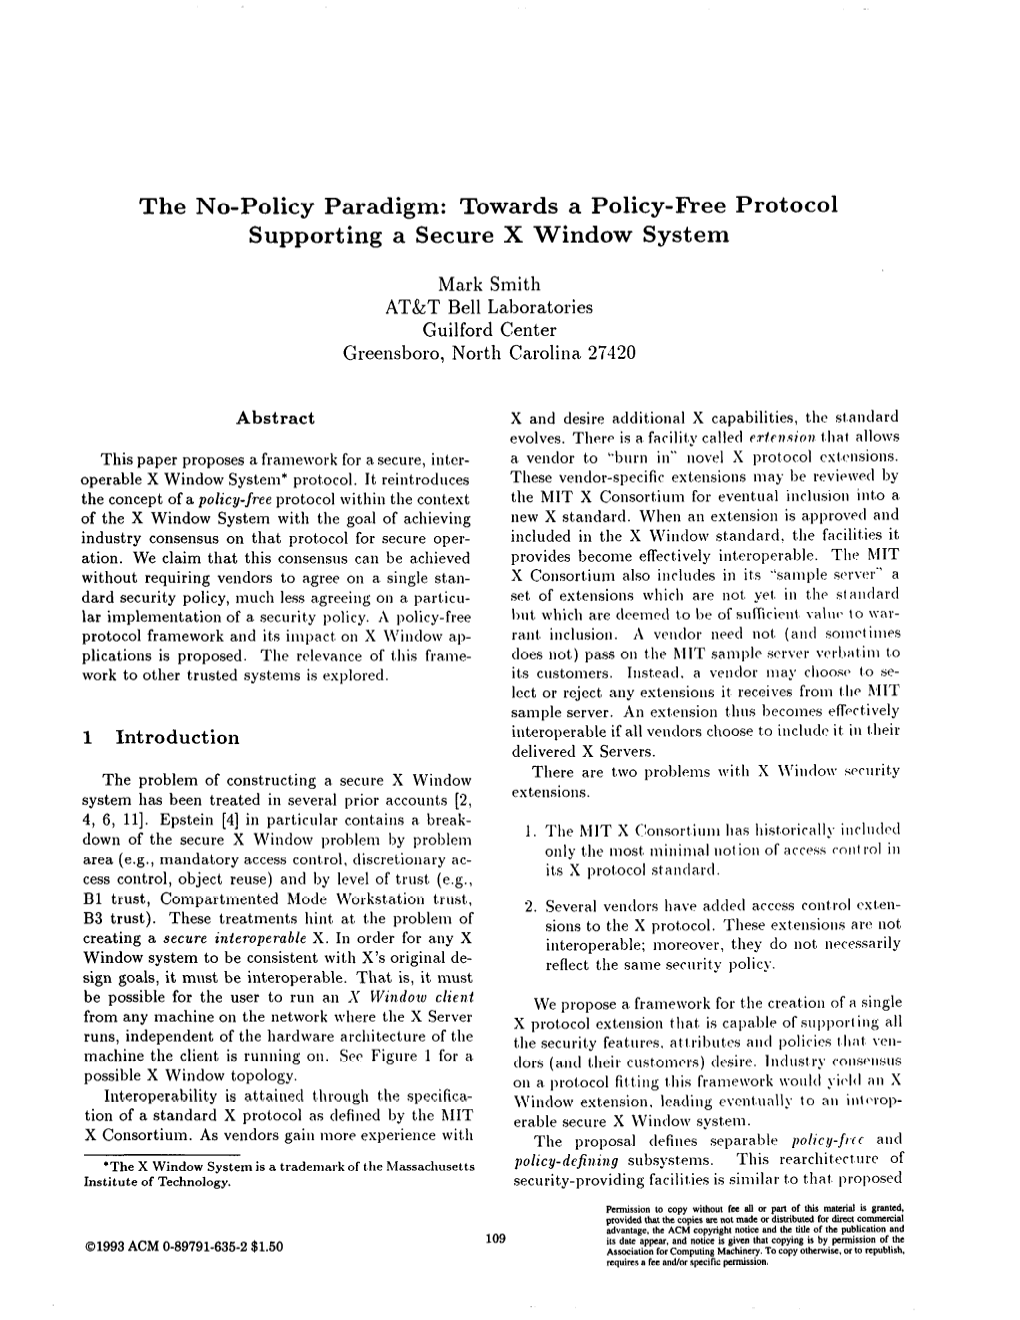 The No-Policy Paradigm: Towards a Policy-Free Protocol Supporting a Secure X Window System